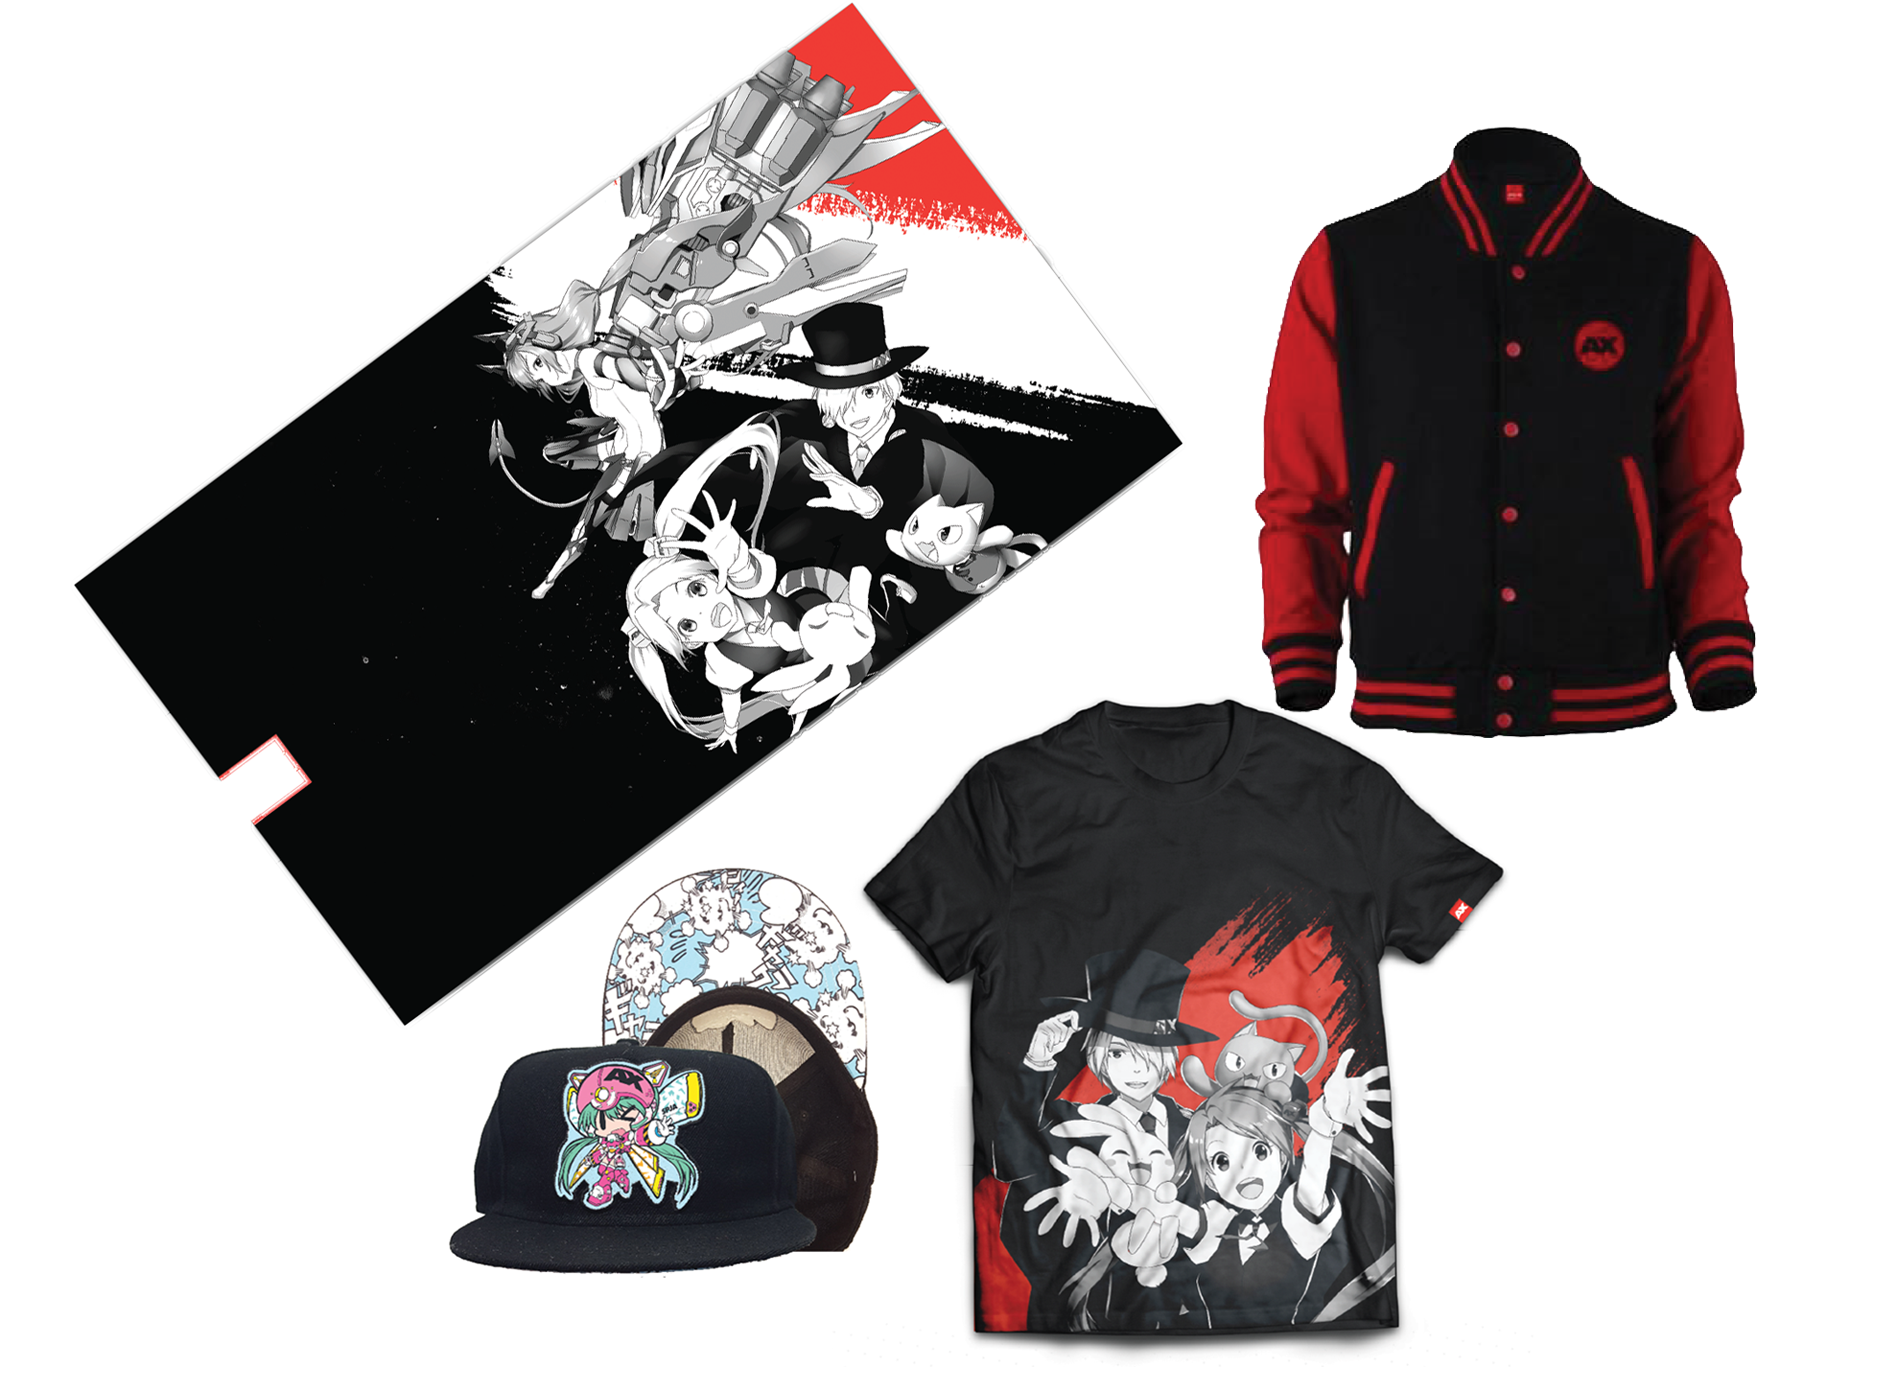 Visit the AX Merch Booth for a Bundle Deal! 